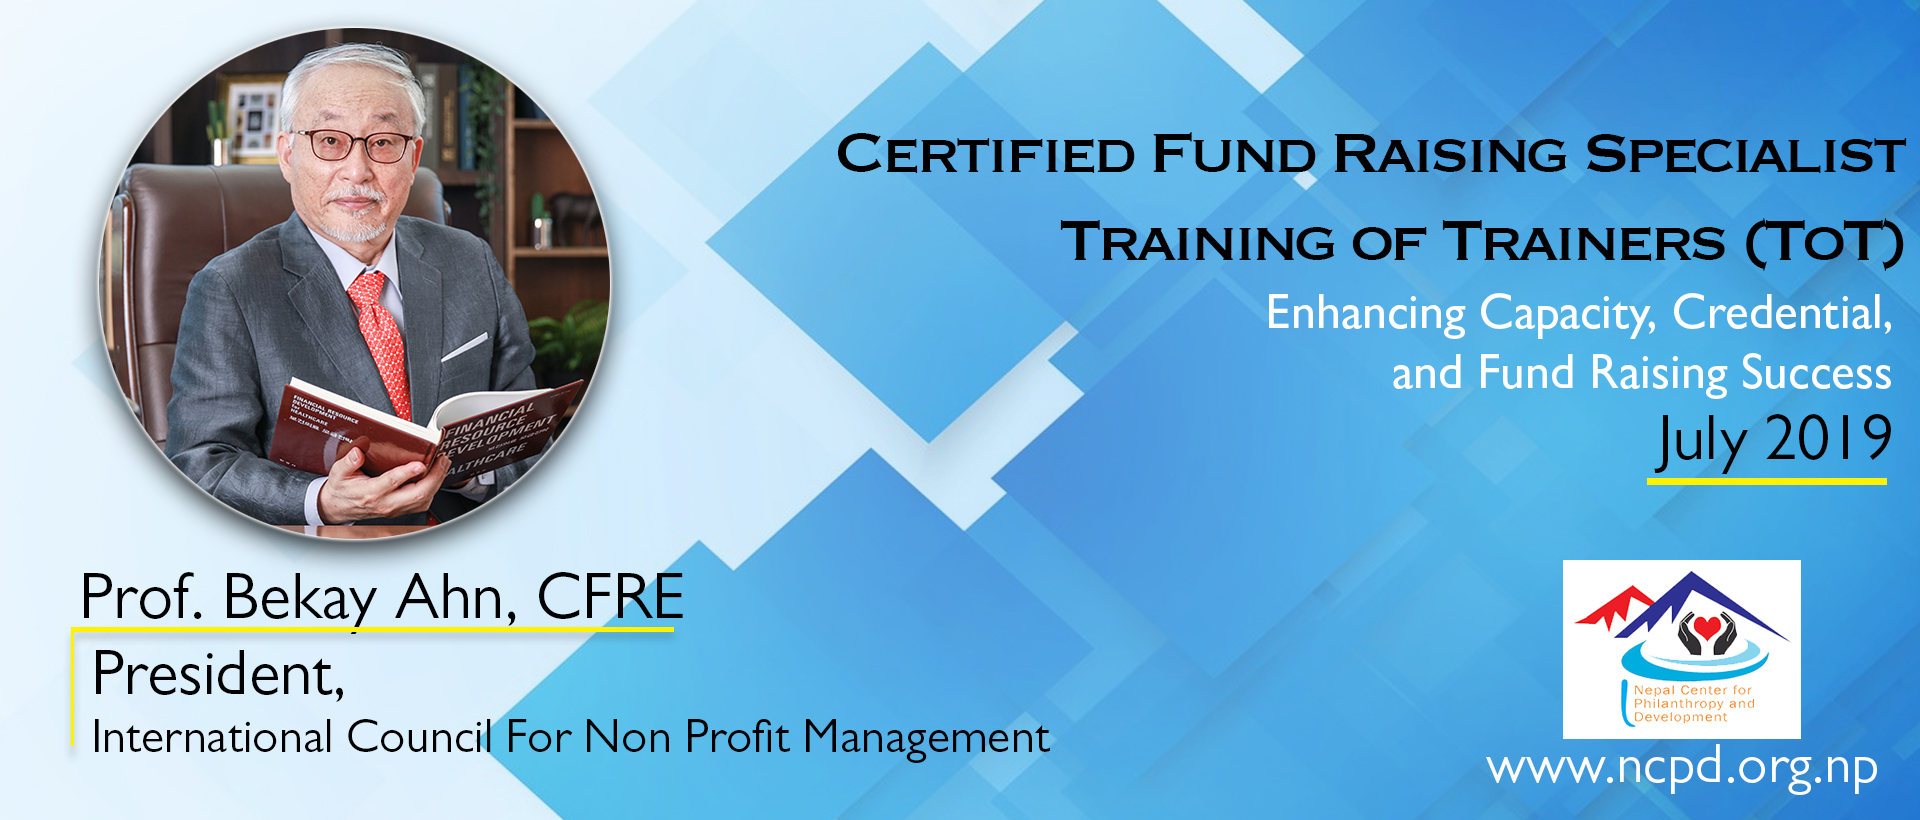 Certified Fund Raising Specialist (CFRS) Training of Trainers (ToT)